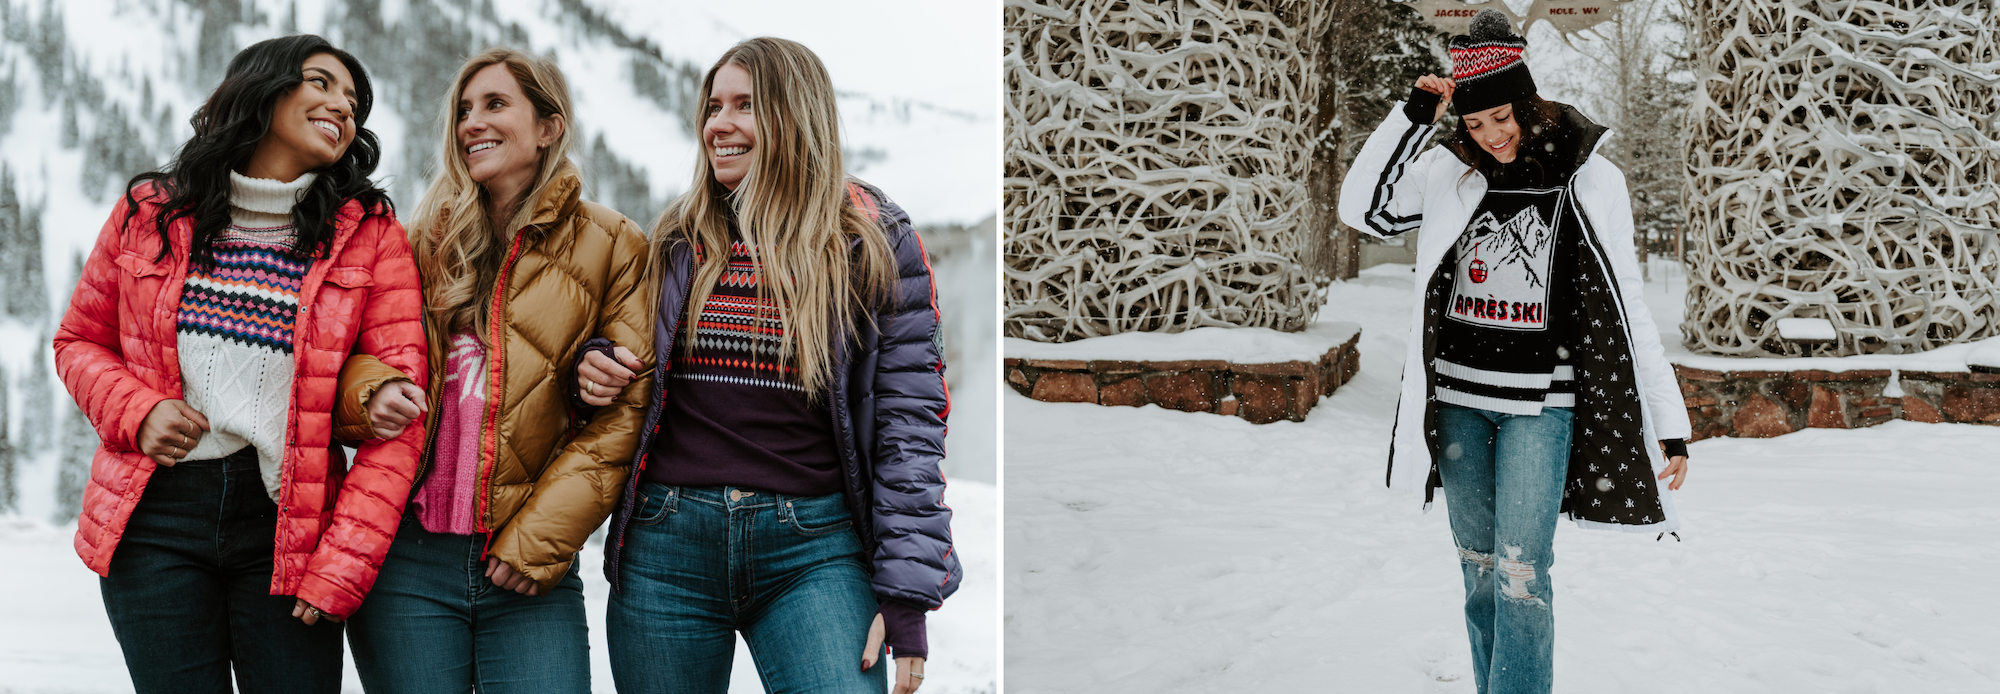 Top 10 Best Women's Ski Jackets In 2023  Stay Comfy And Cozy On The Slopes  